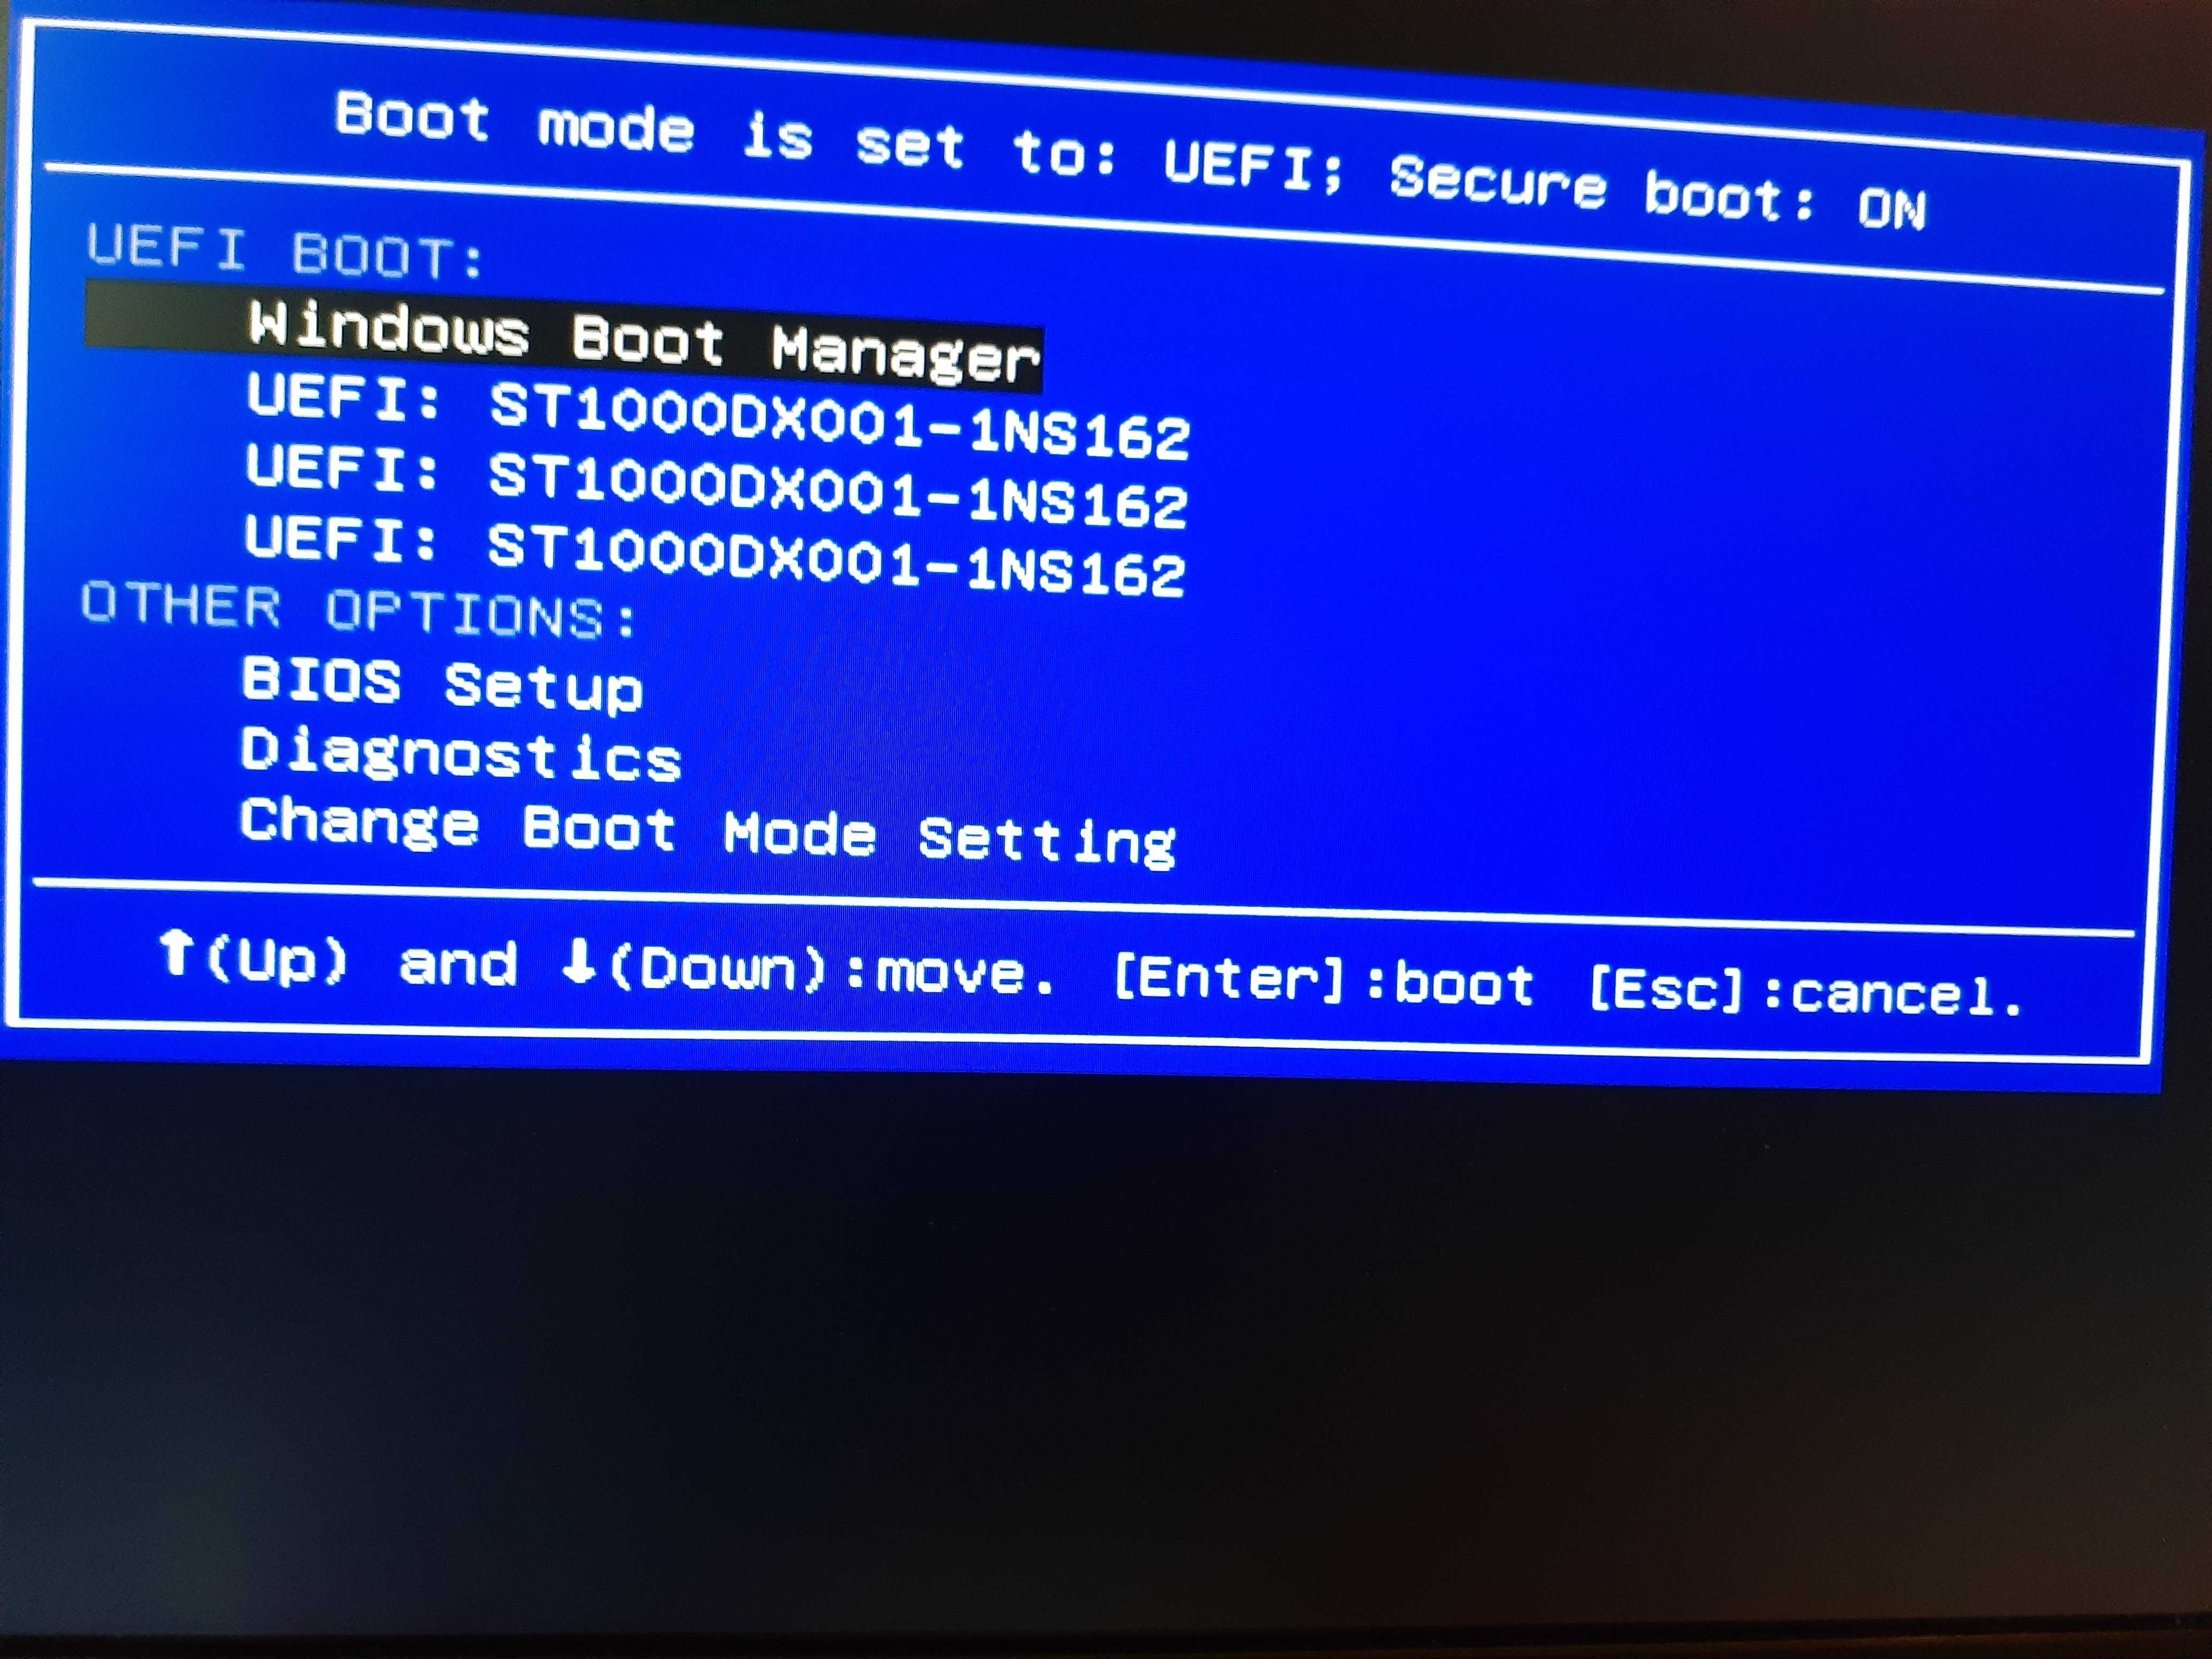 How to enable or disable secure boot